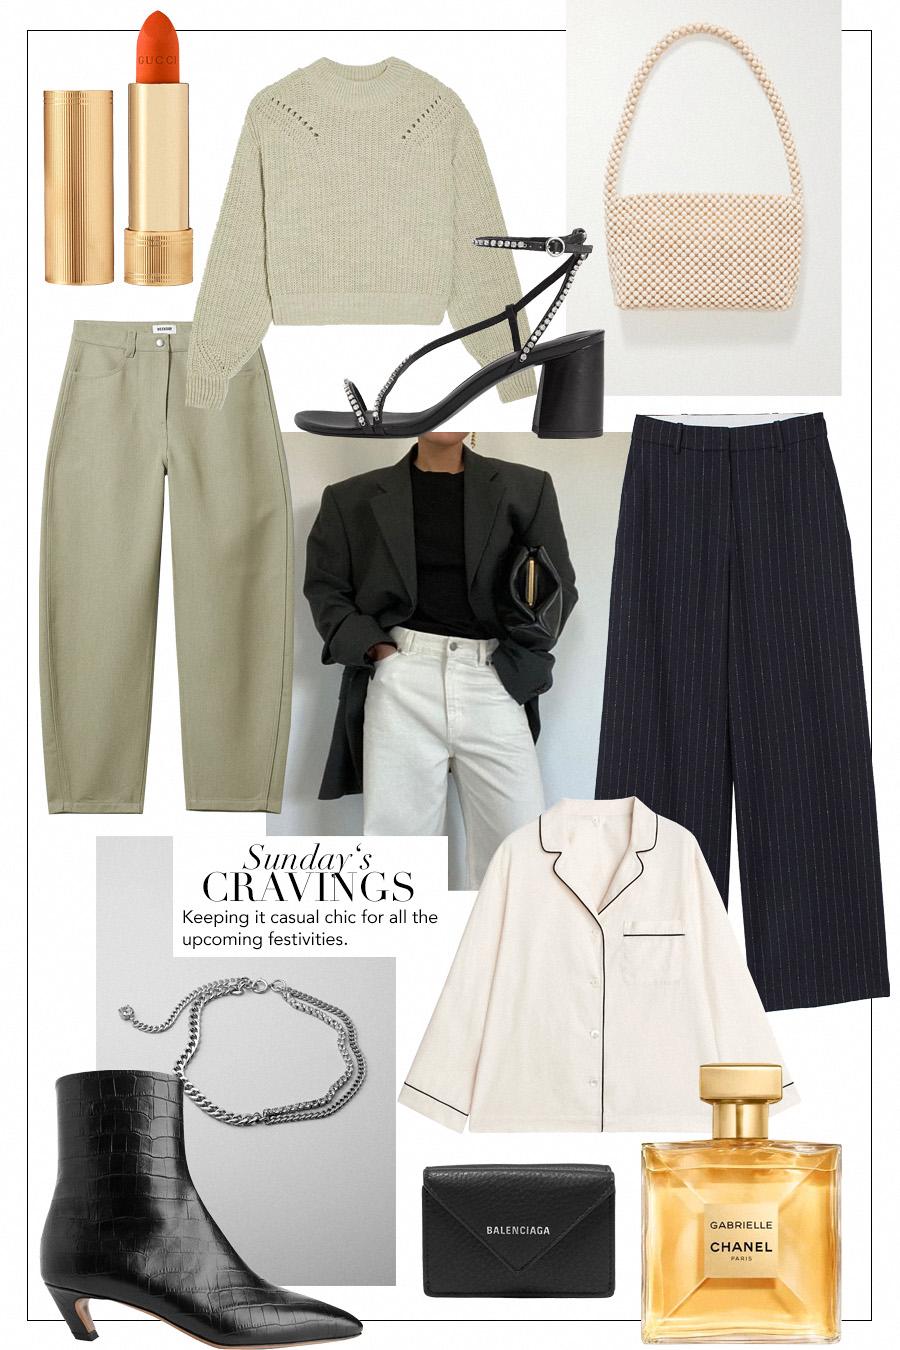 Sunday’s Cravings: Casual Chic Festivities